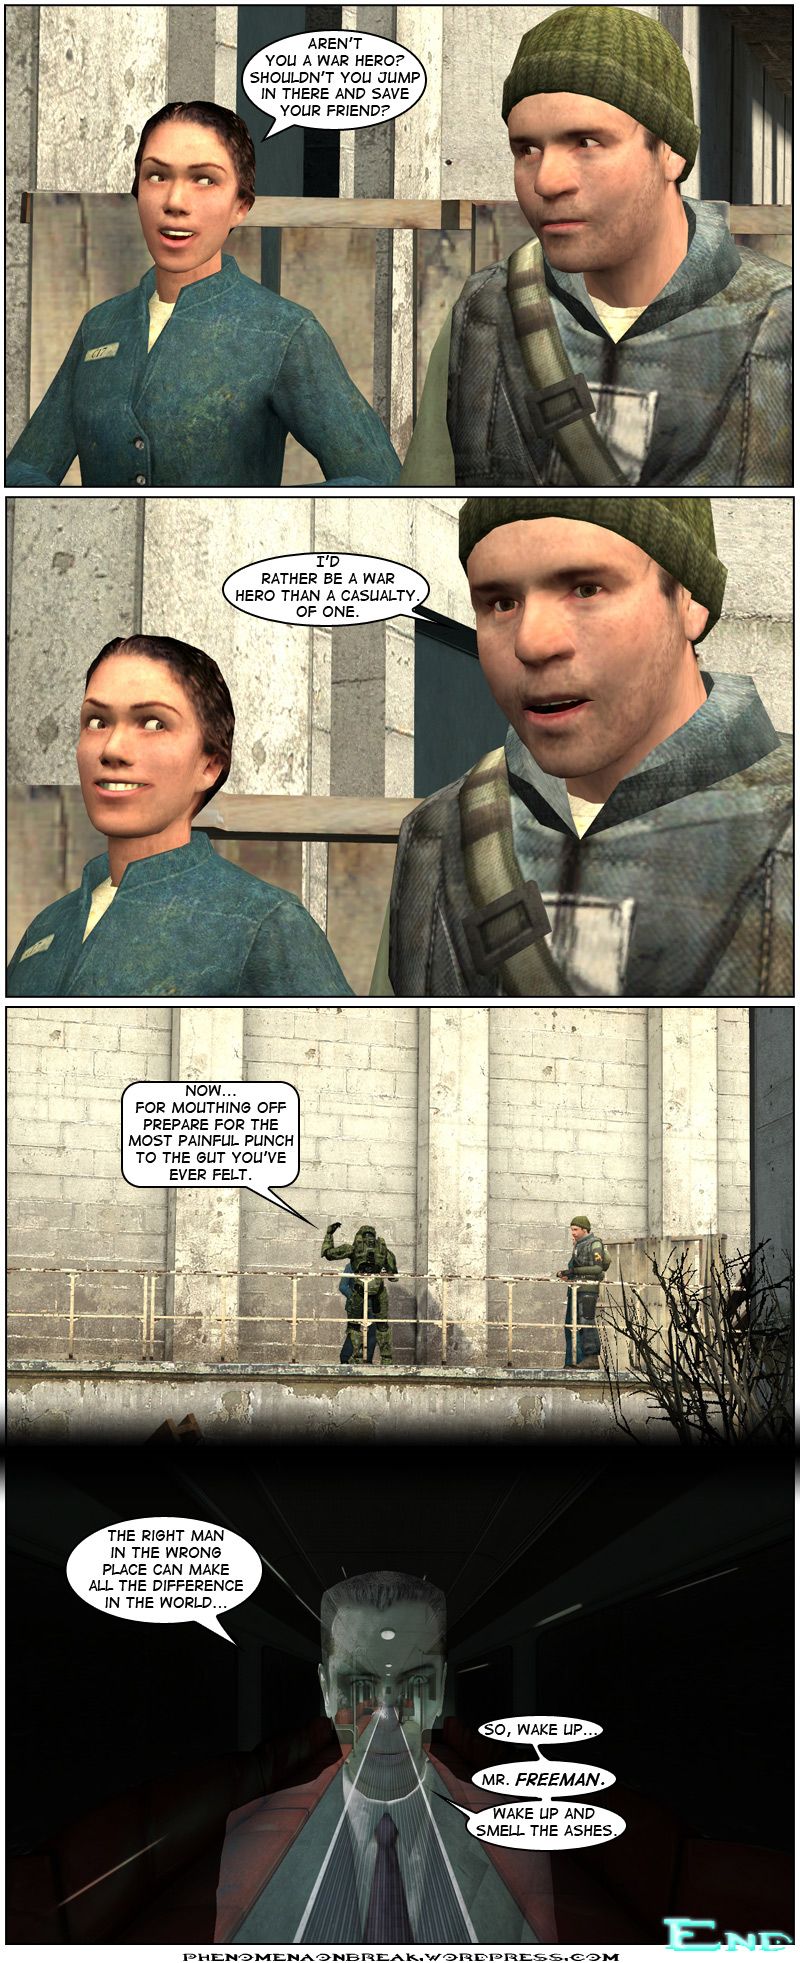 Amy asks Bernard if she isn't a war hero and if he shouldn't jump in there and save his friend. Bernard simply states he'd rather be a war hero than a casualty of one. Master Chief tells Salvatore to prepare for the most painful punch to the gut he's ever felt for mouthing off. Meanwhile, in a train in City 17, the G-Man says that the right man in the wrong place can make all the difference in the world and tells Mister Freeman to wake up, wake up and smell the ashes. The end.